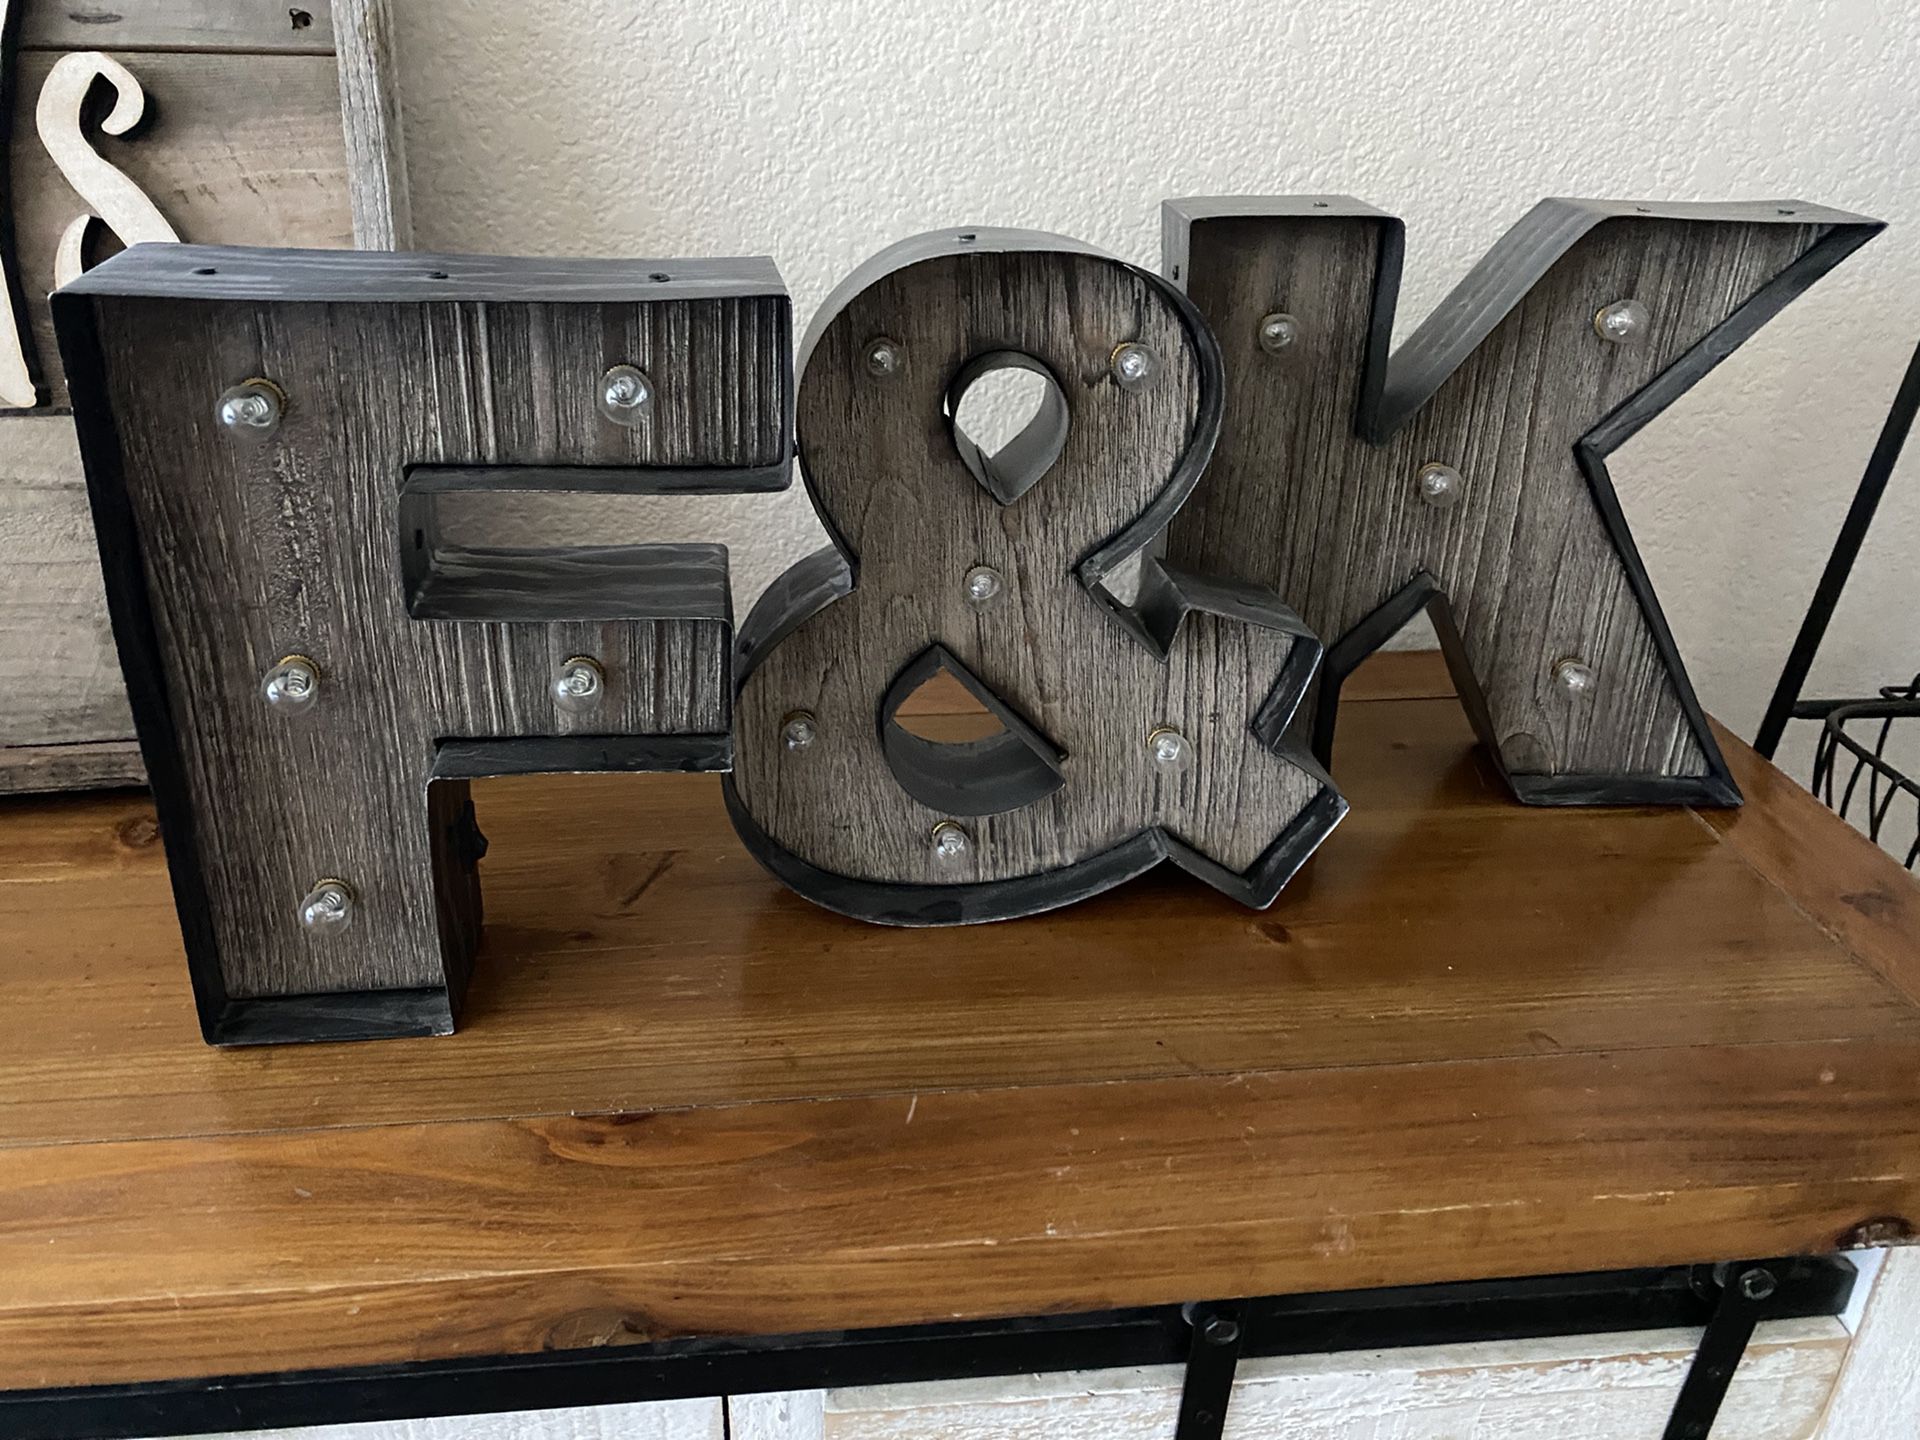 Light up letters (K&F) all 3 for $25